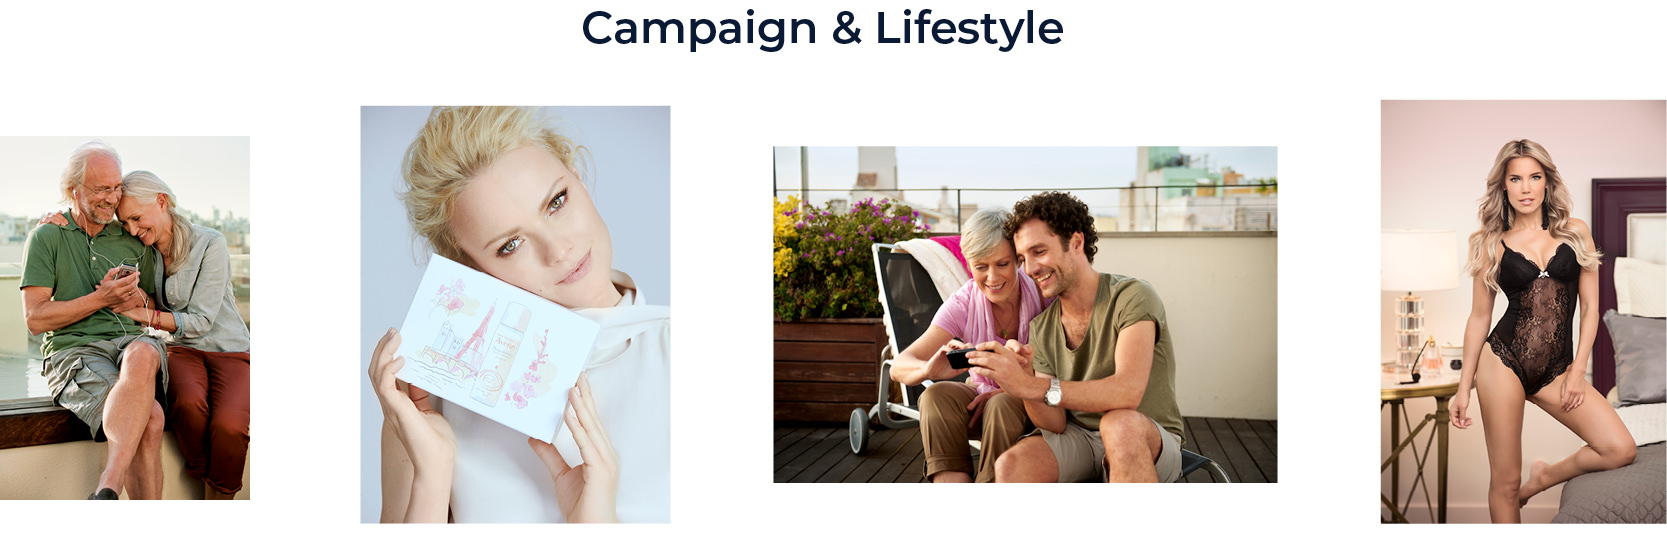 campaign and lifestyle content production